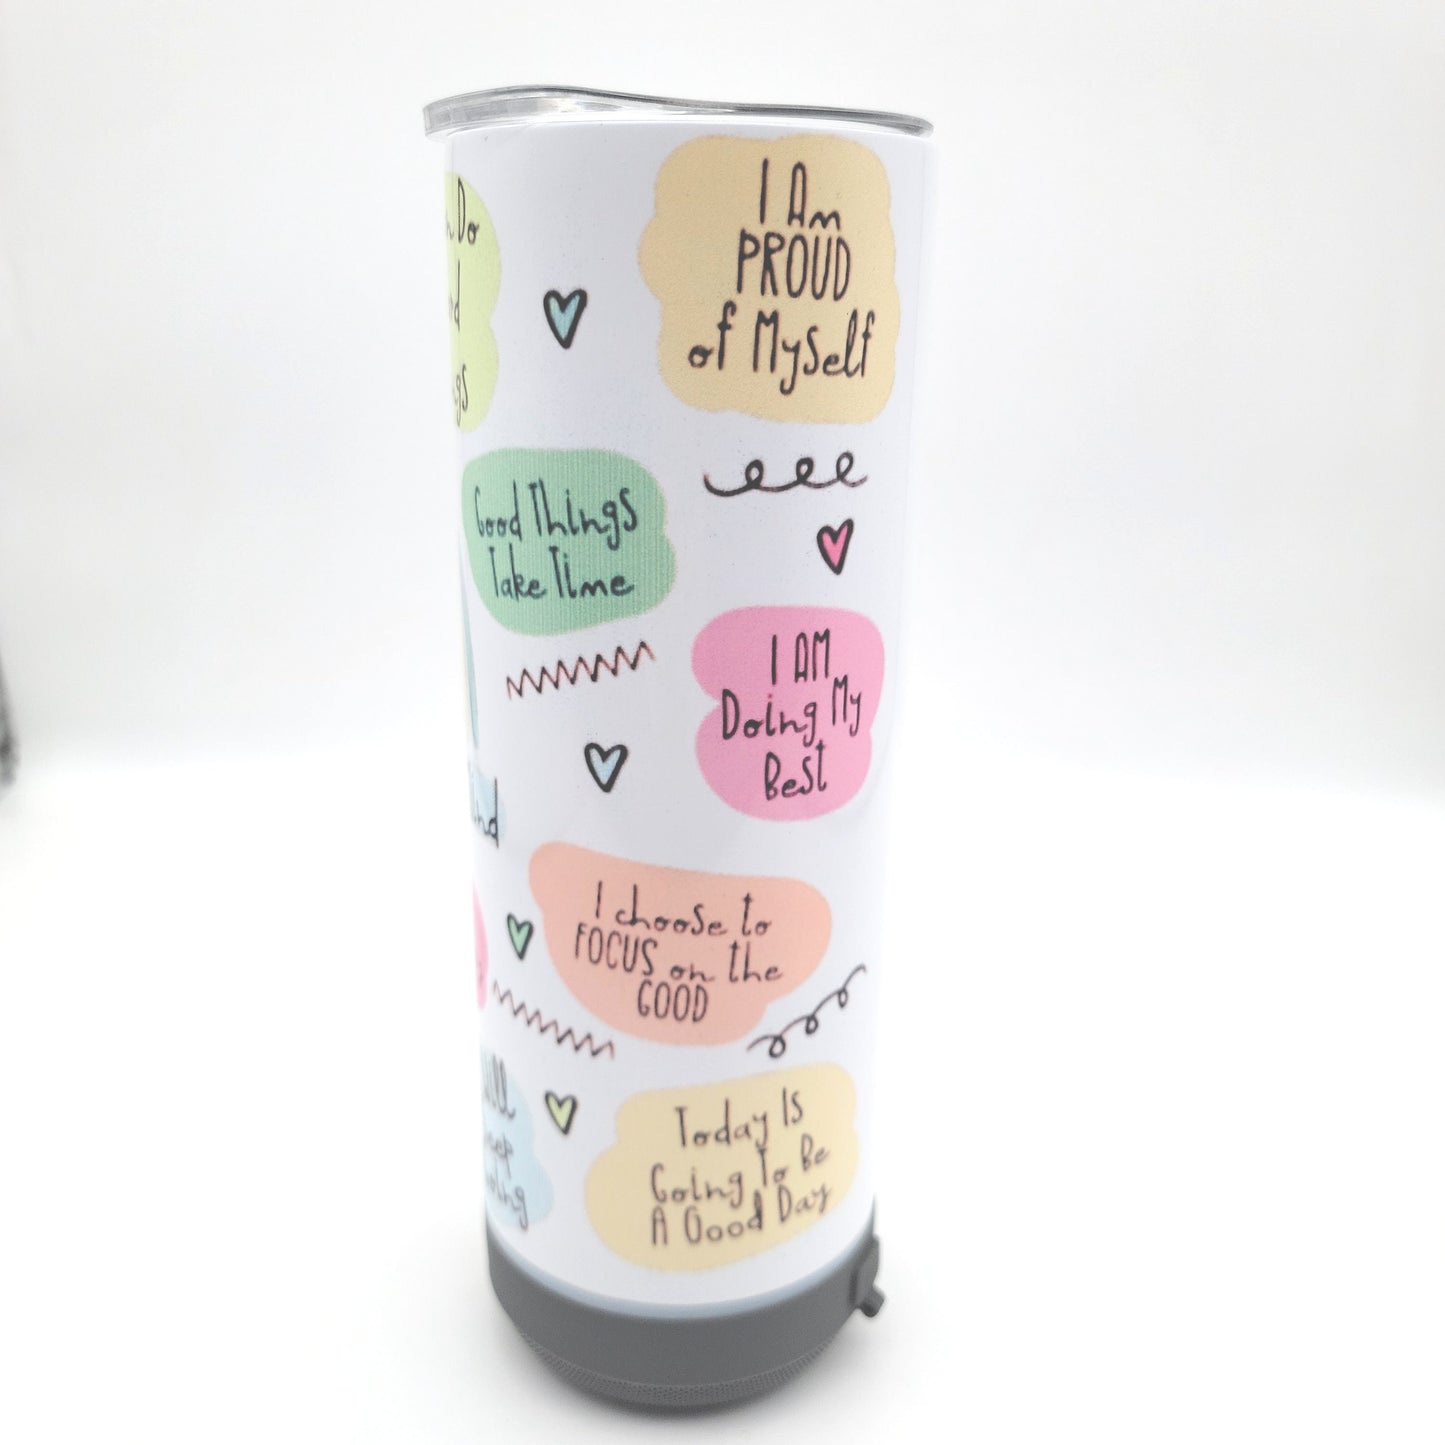 Be kind to your mind tumbler with bluetooth speaker